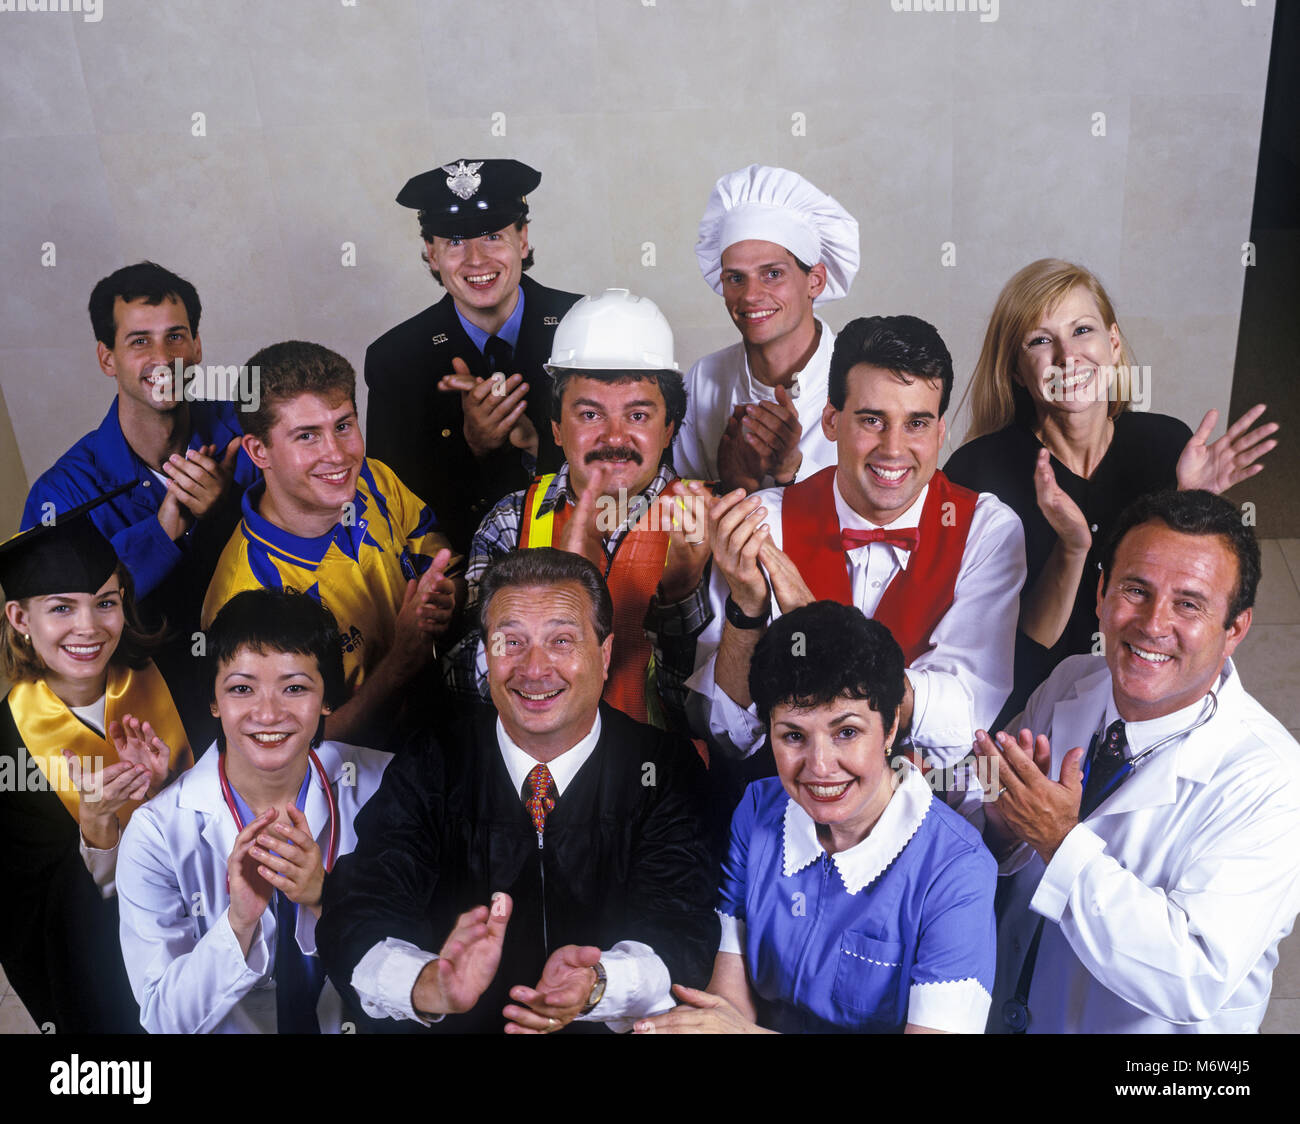 1996 HISTORICAL MULTI-ETHNIC OCCUPATIONS GROUP CLAPPING Stock Photo